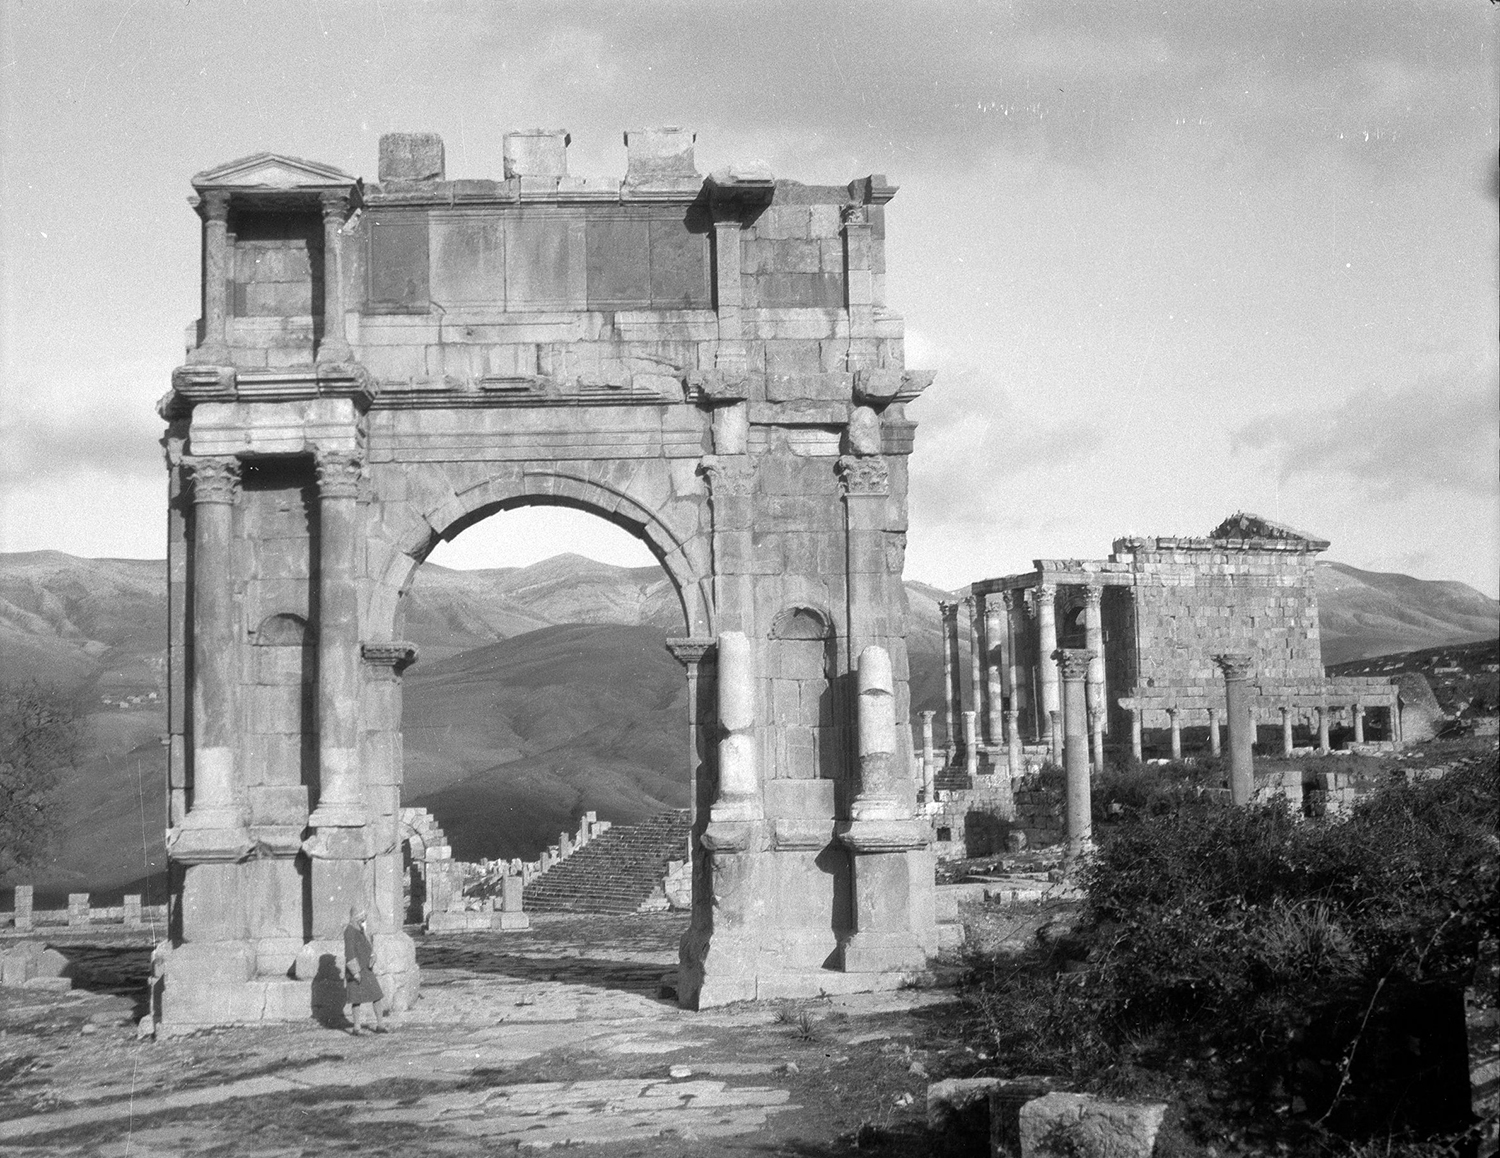 The Arch of Caracalla